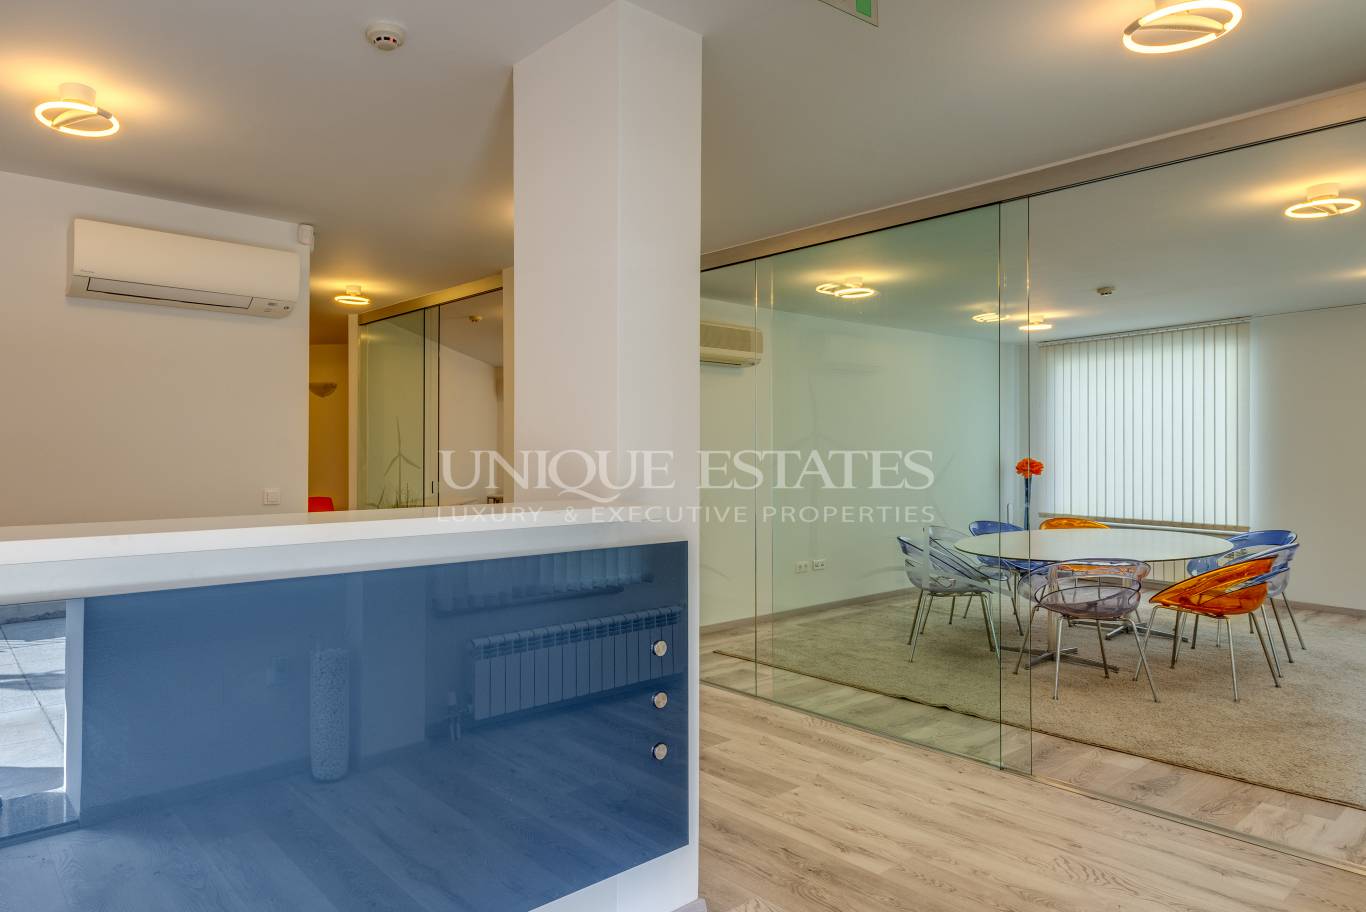 Office for rent in Sofia, Lozenets with listing ID: K14907 - image 3